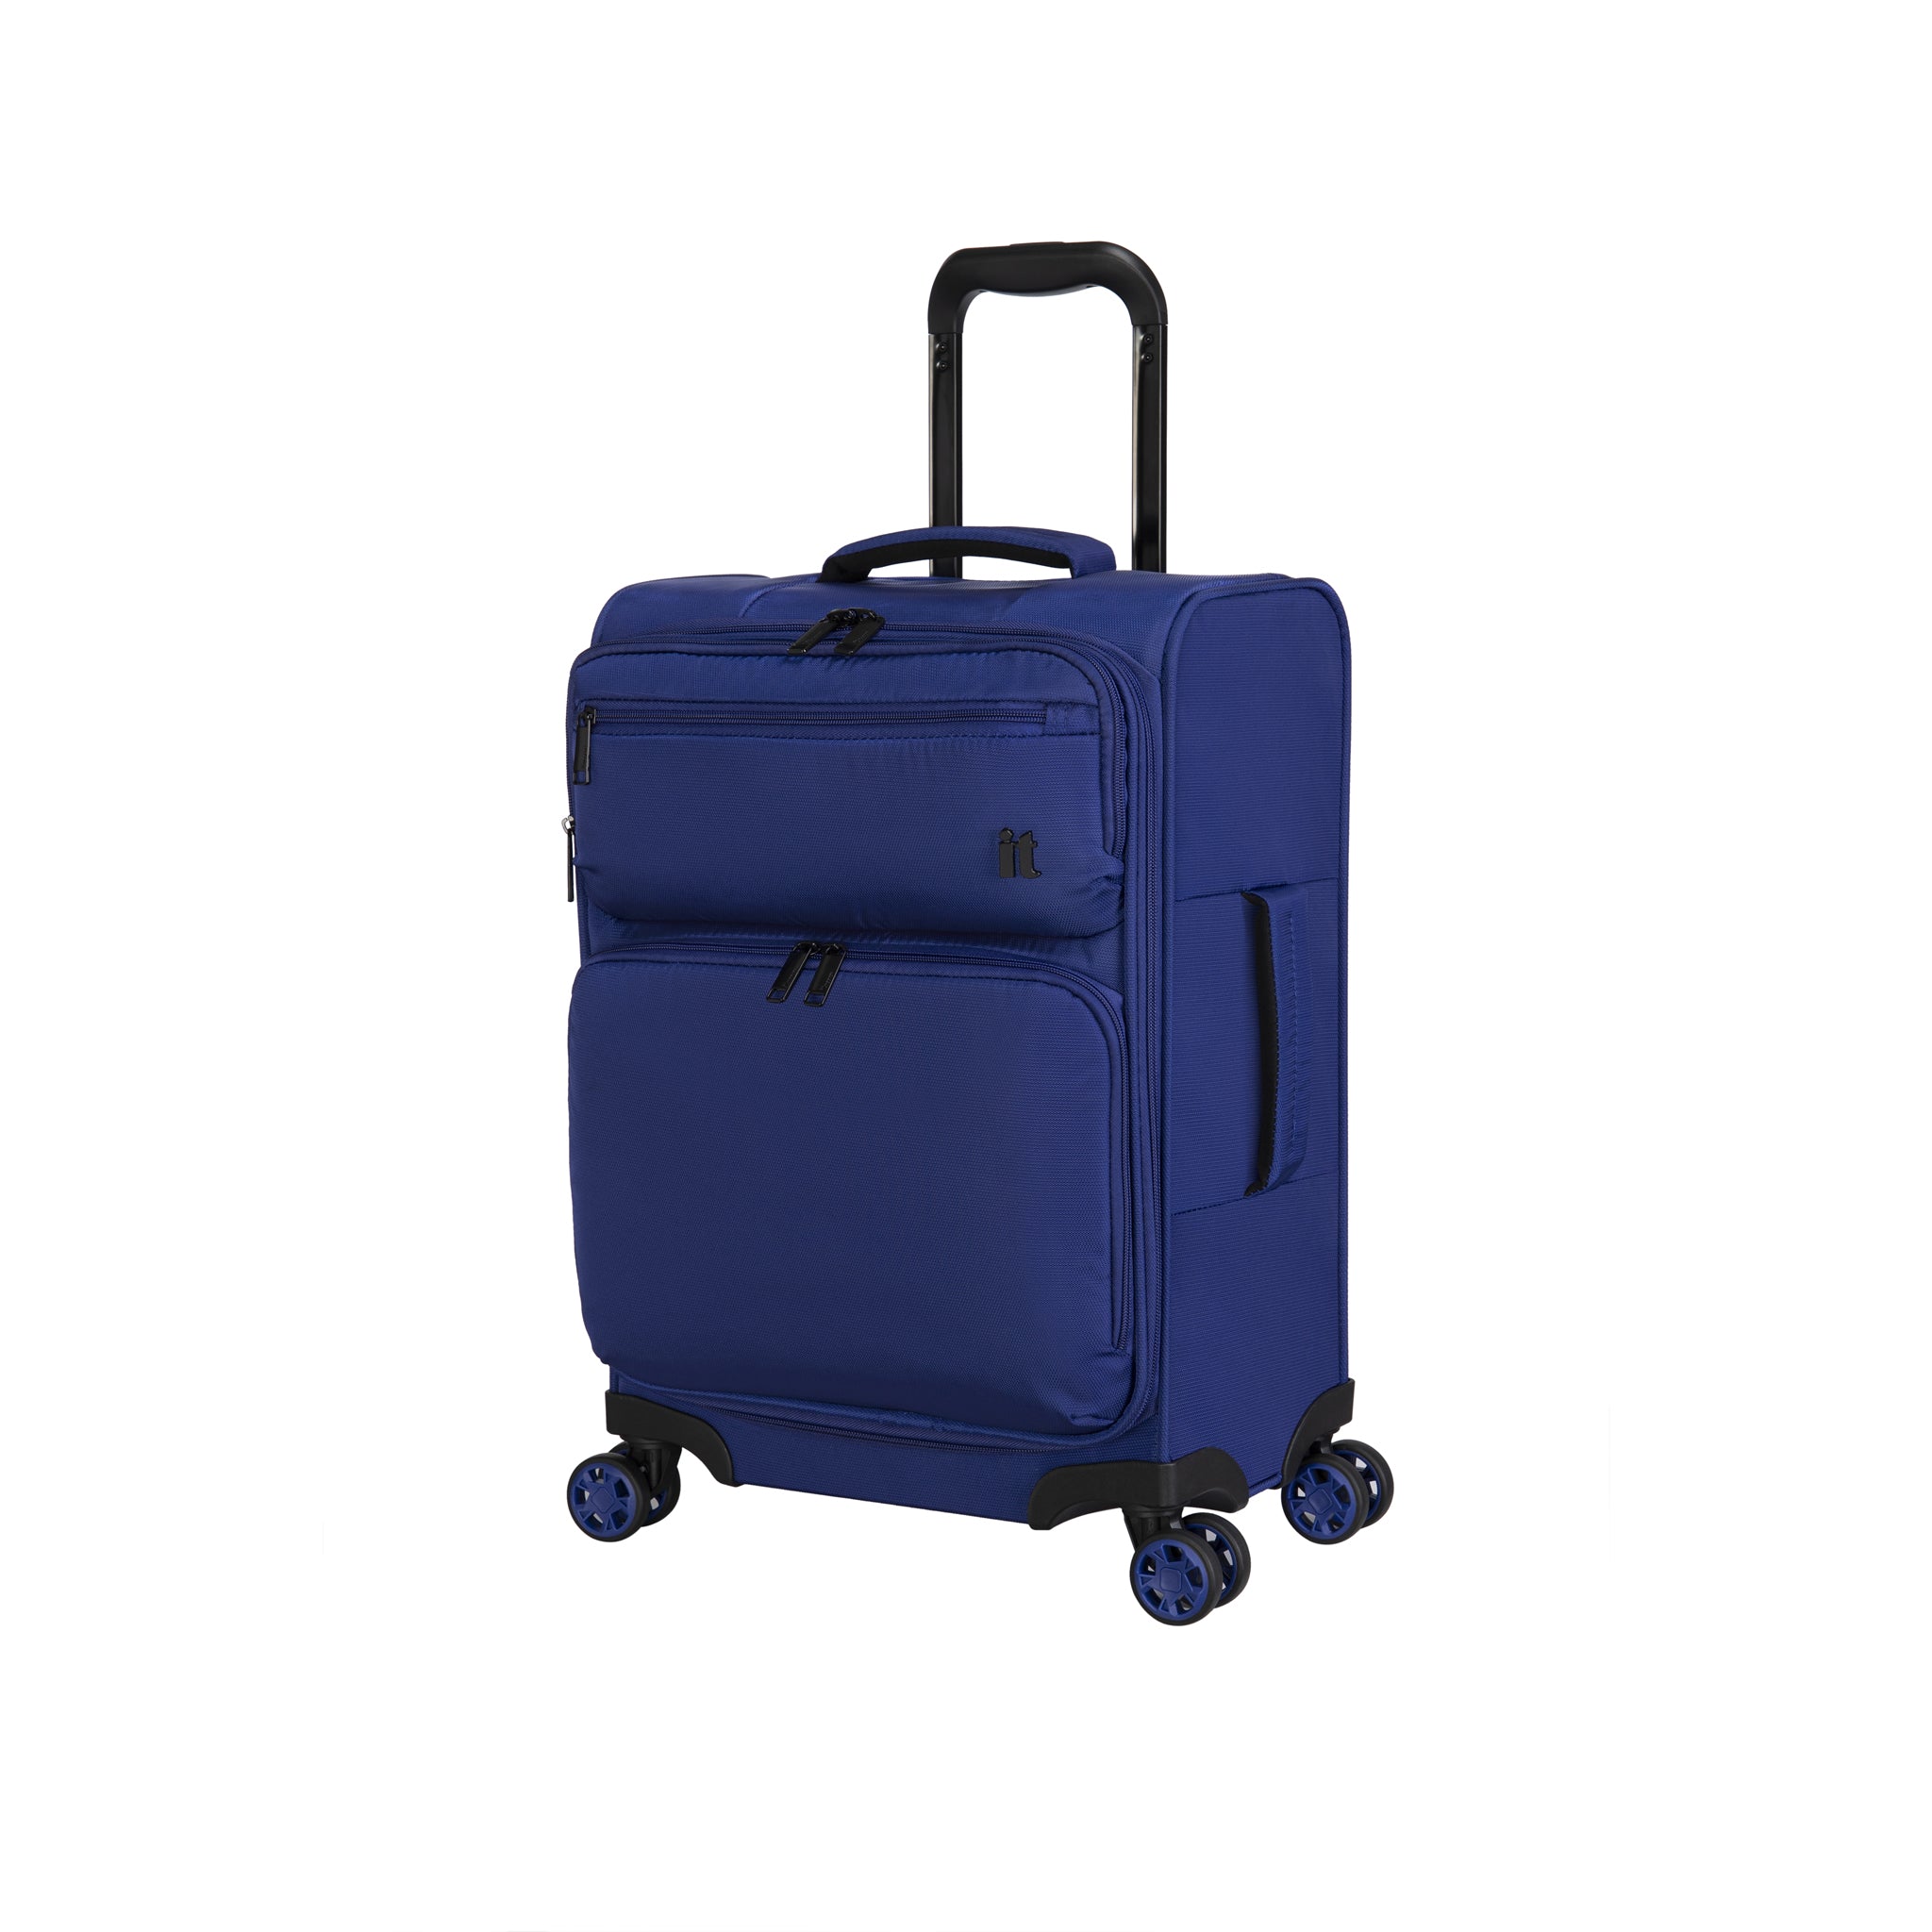 it Luggage | Downtime - Sit-On Cabin in Blue